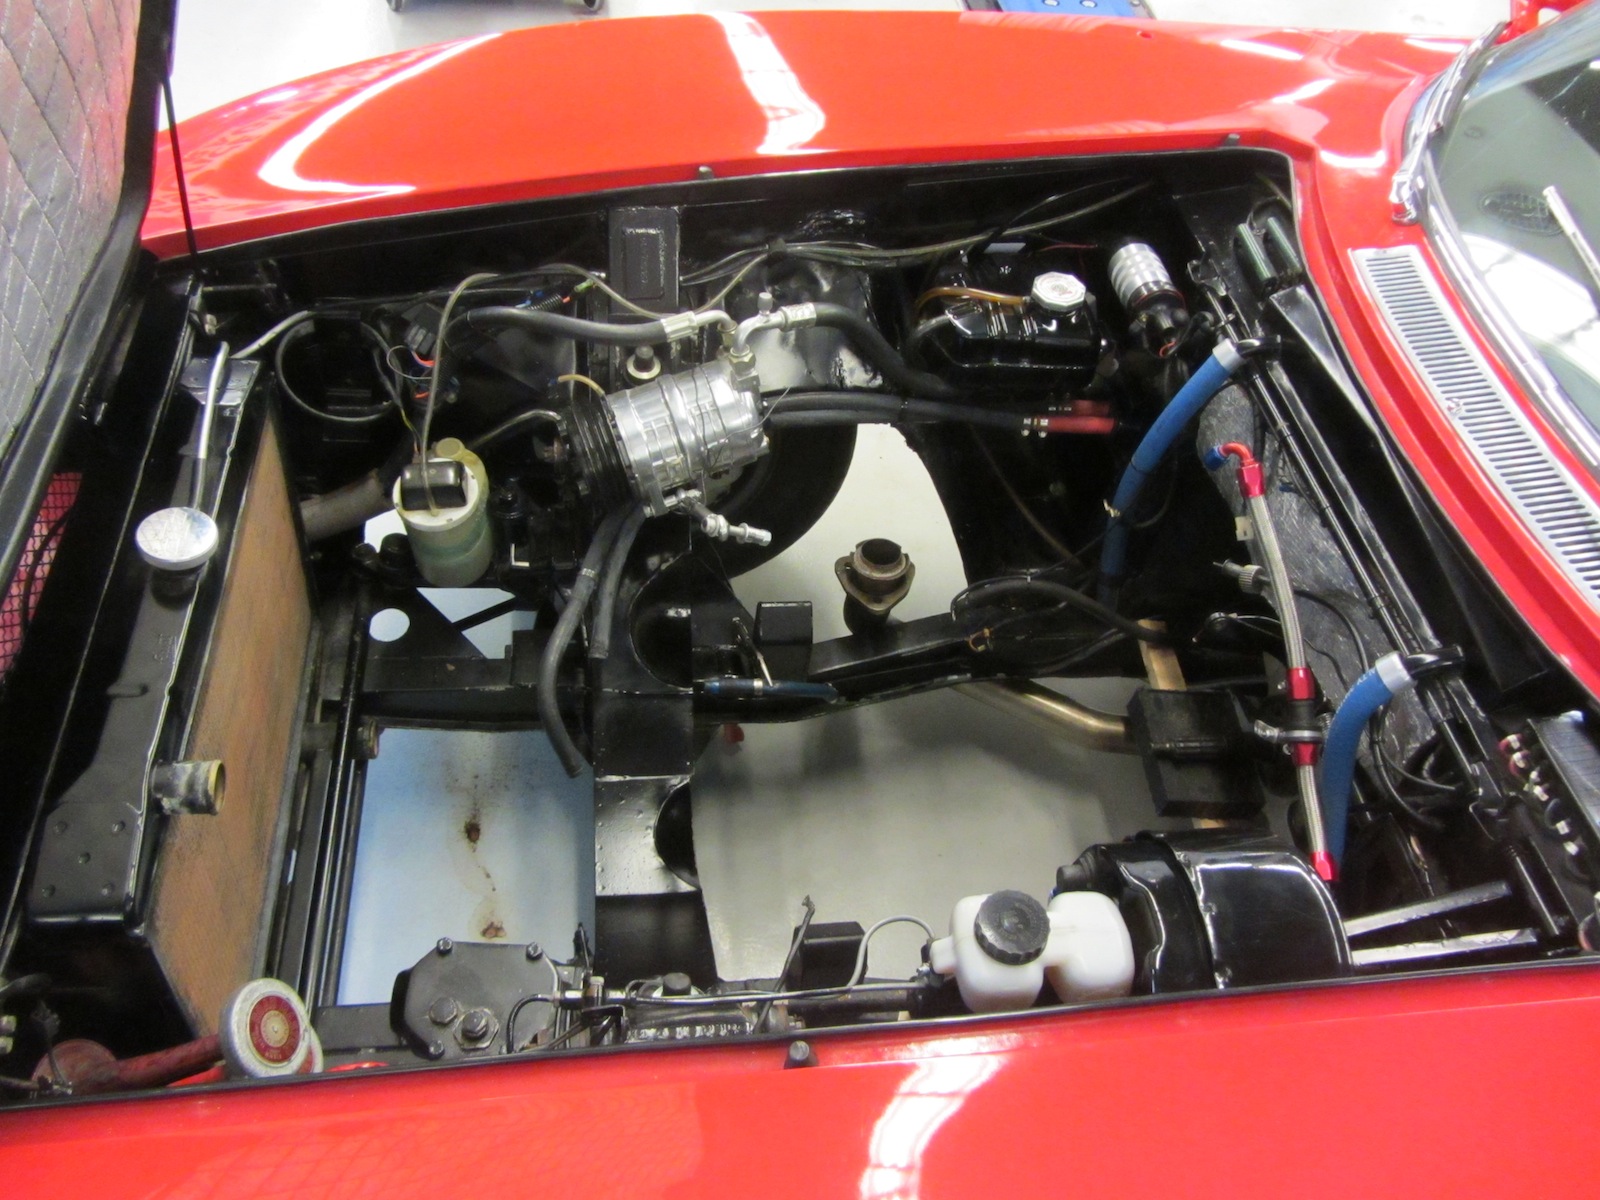 Iso Grifo for sale engine